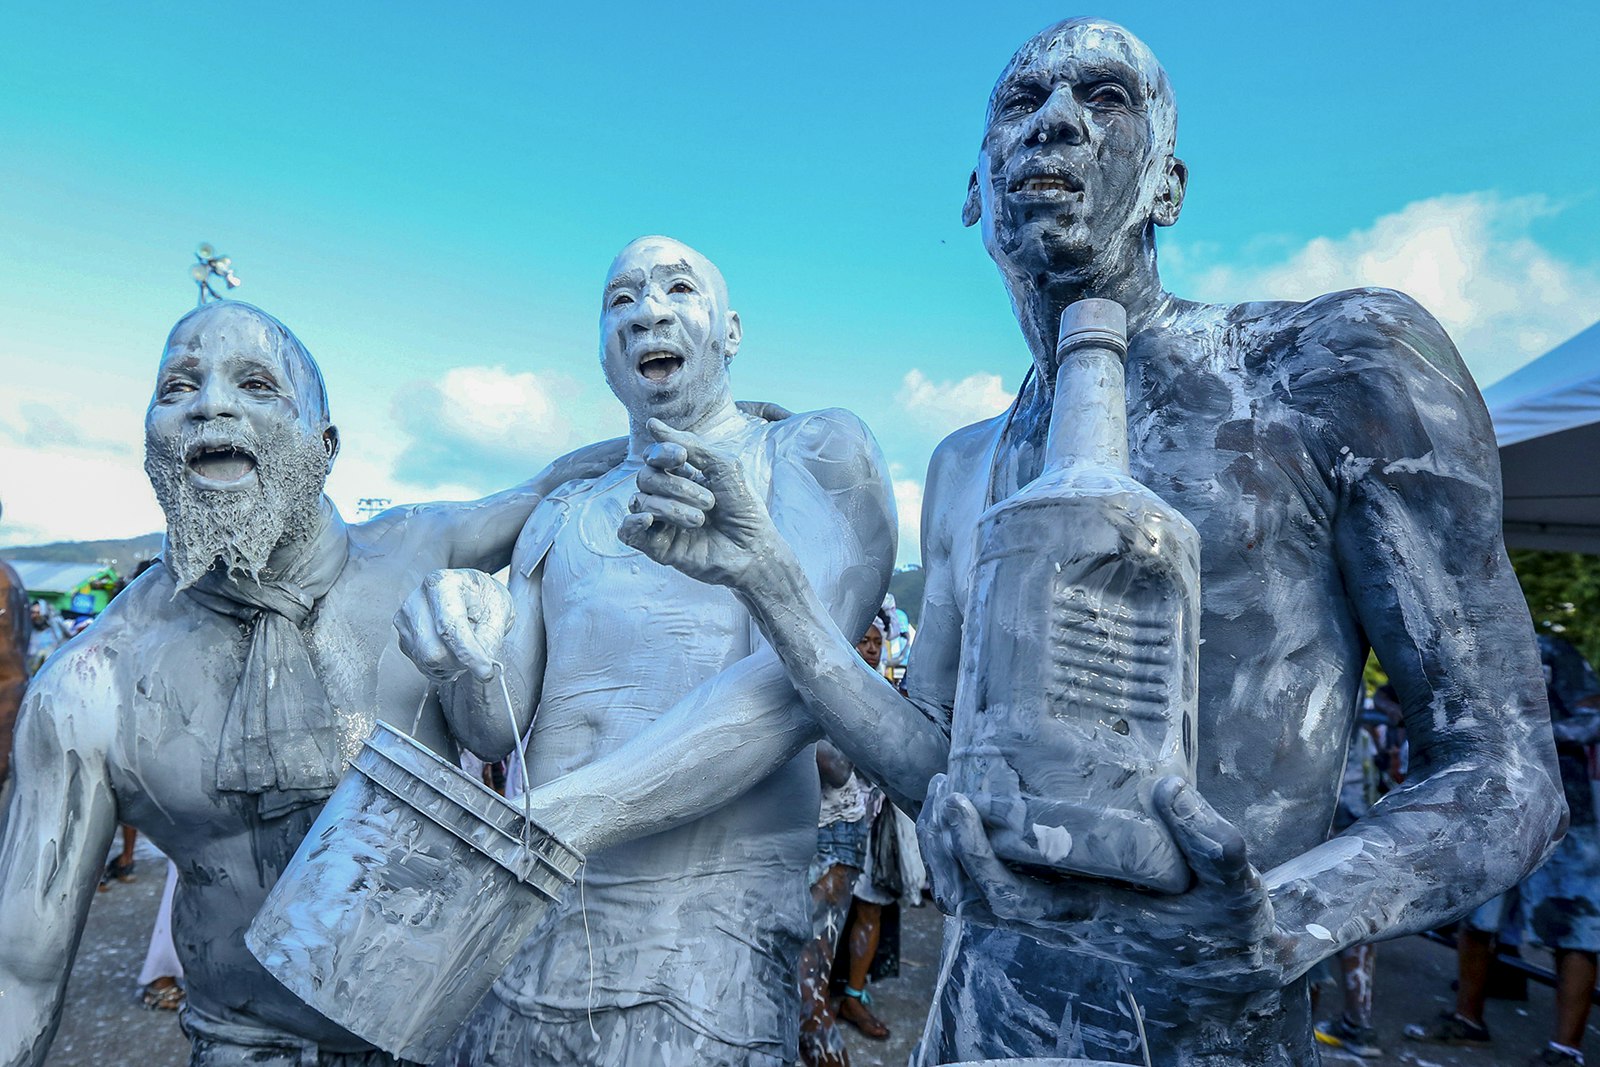 Three men covered in white paint hold a bucket and bottle while singing/cheering